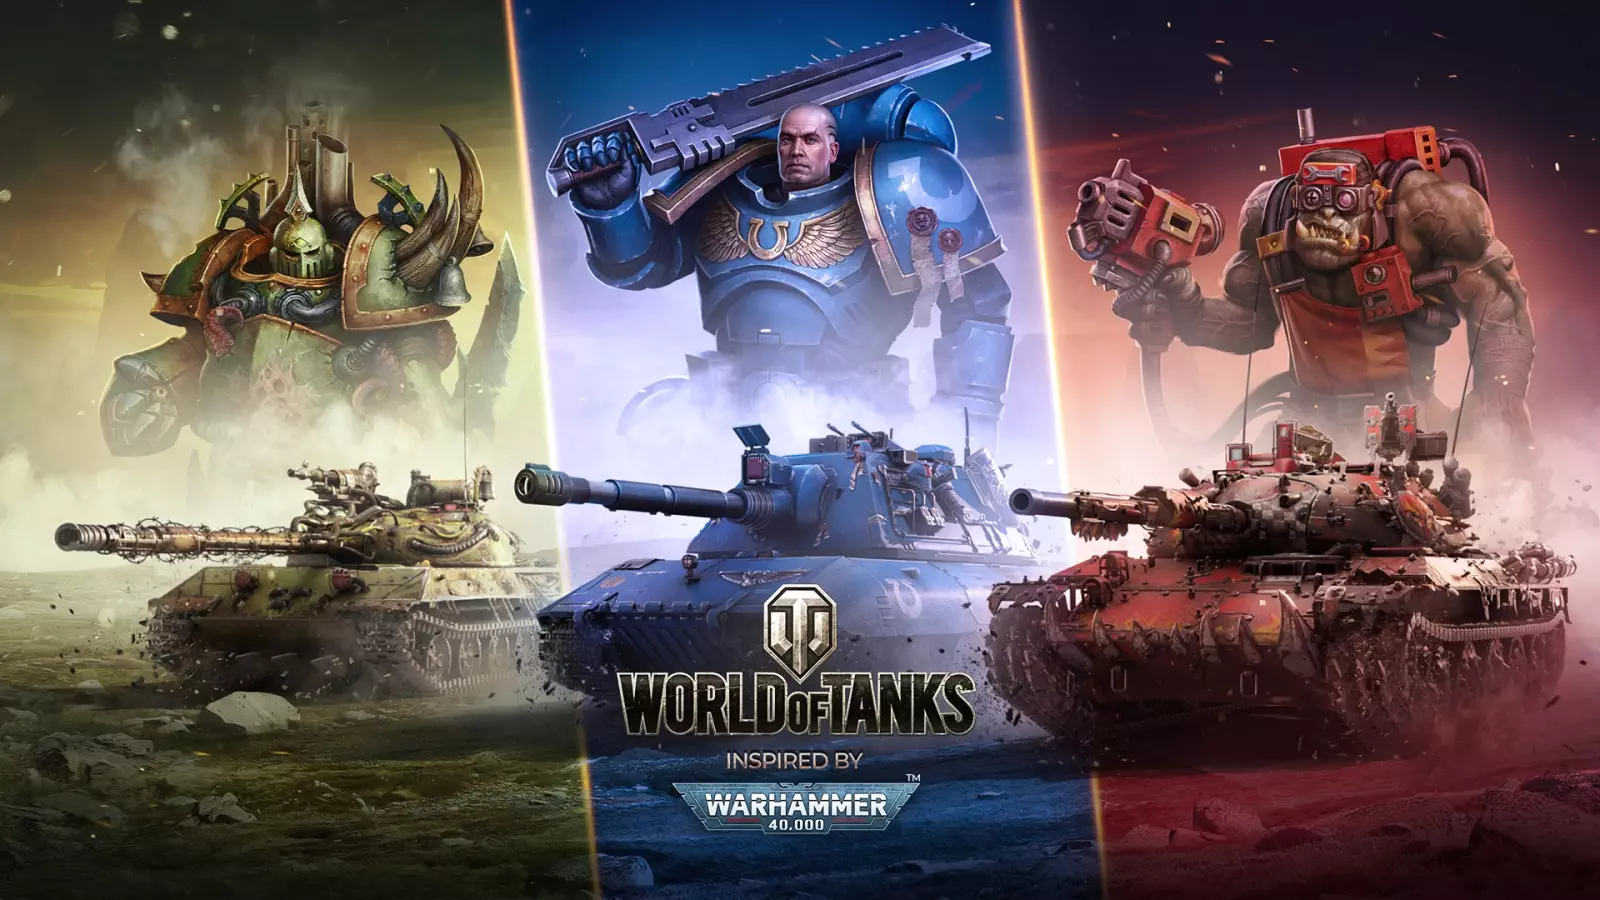 Watch Warhammer 40,000 and World of Tanks come together in Battle Pass Season VIII – Latest News